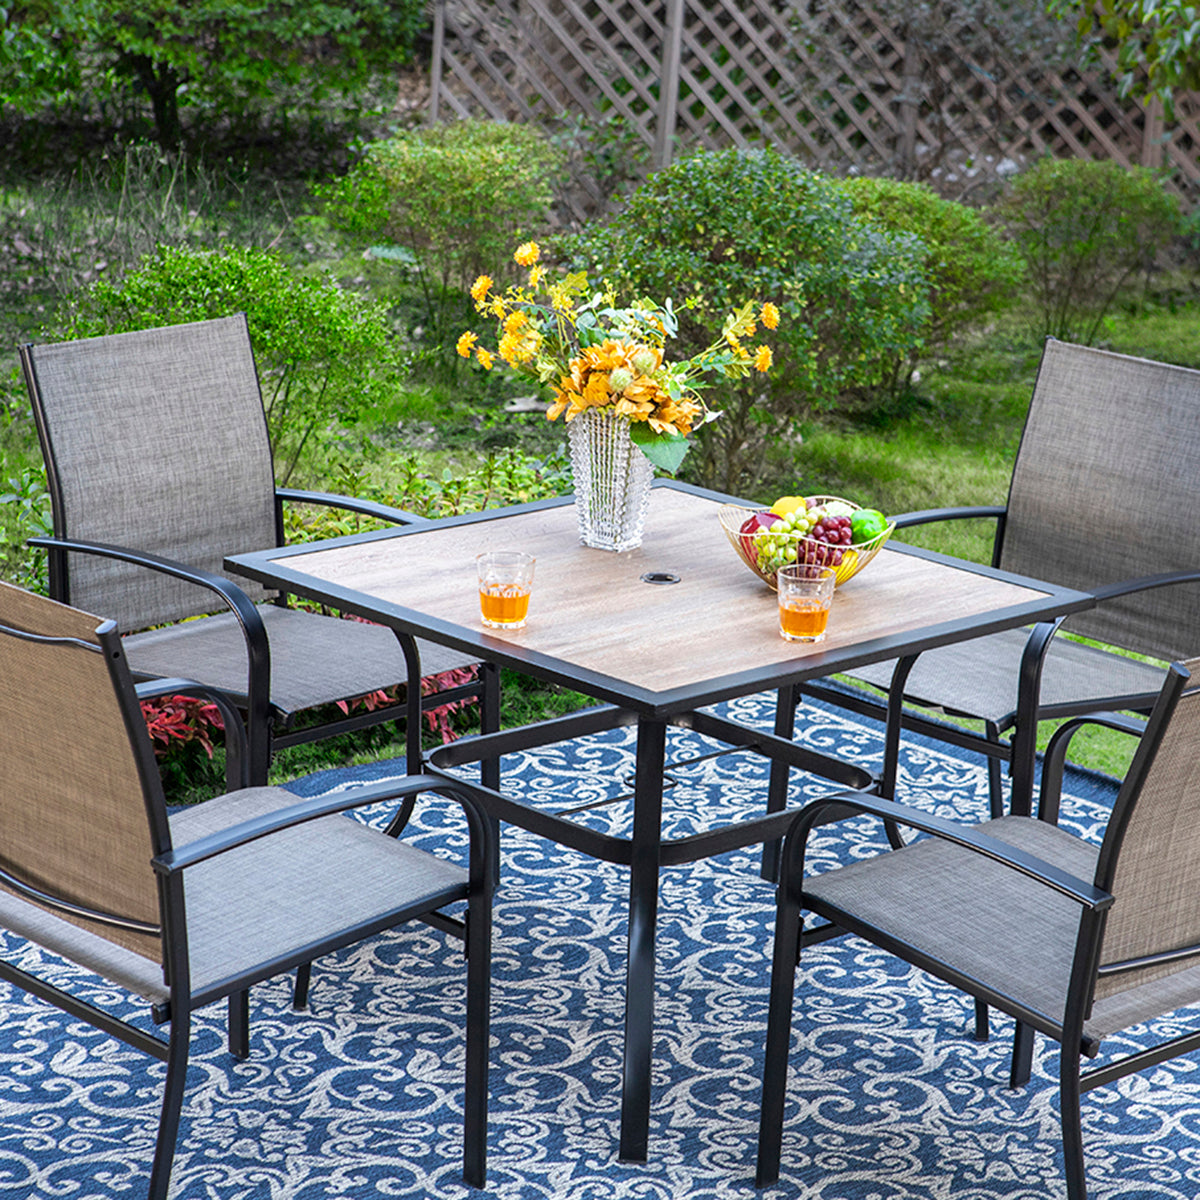 Sophia & William 5-Piece Patio Dining Sets Wood-look Square Table & Light Textilene Fixed Chair